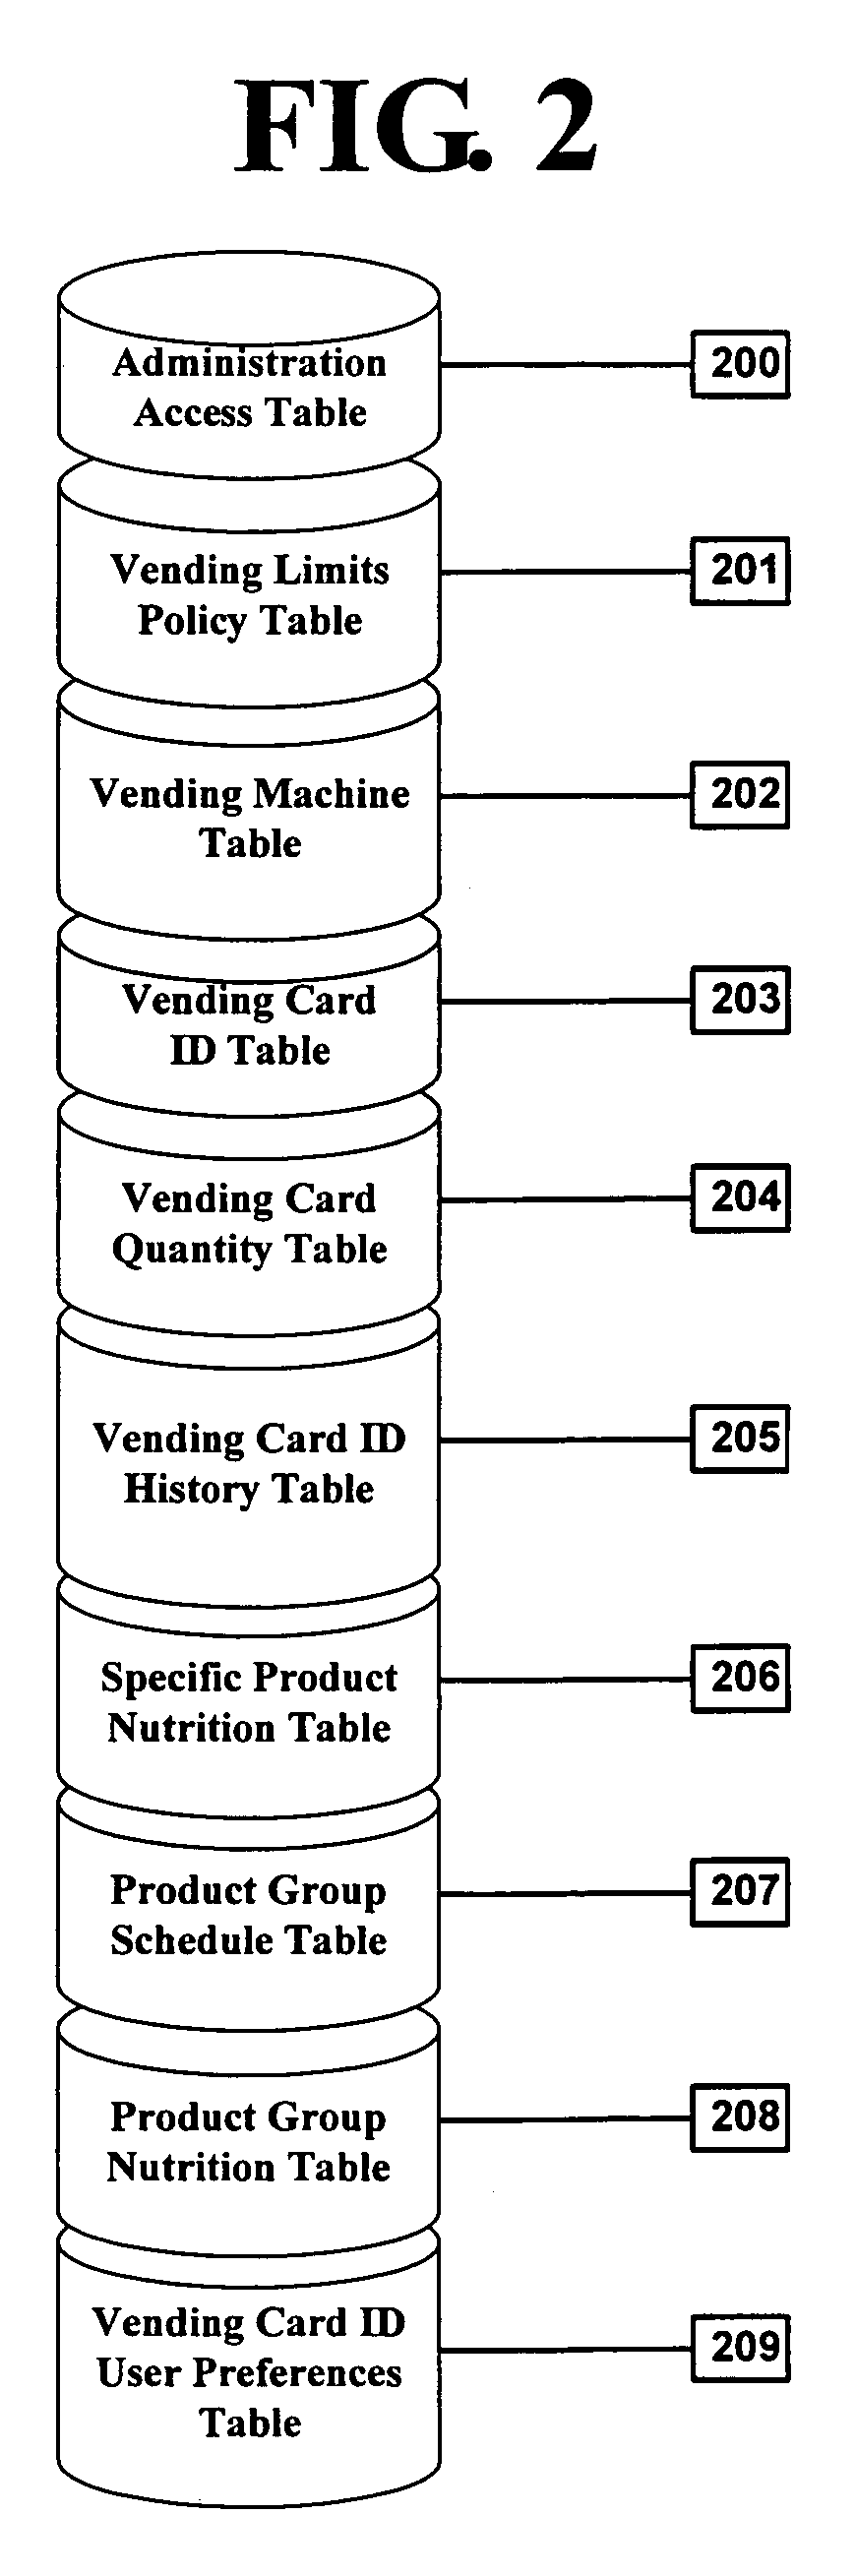 Product control system